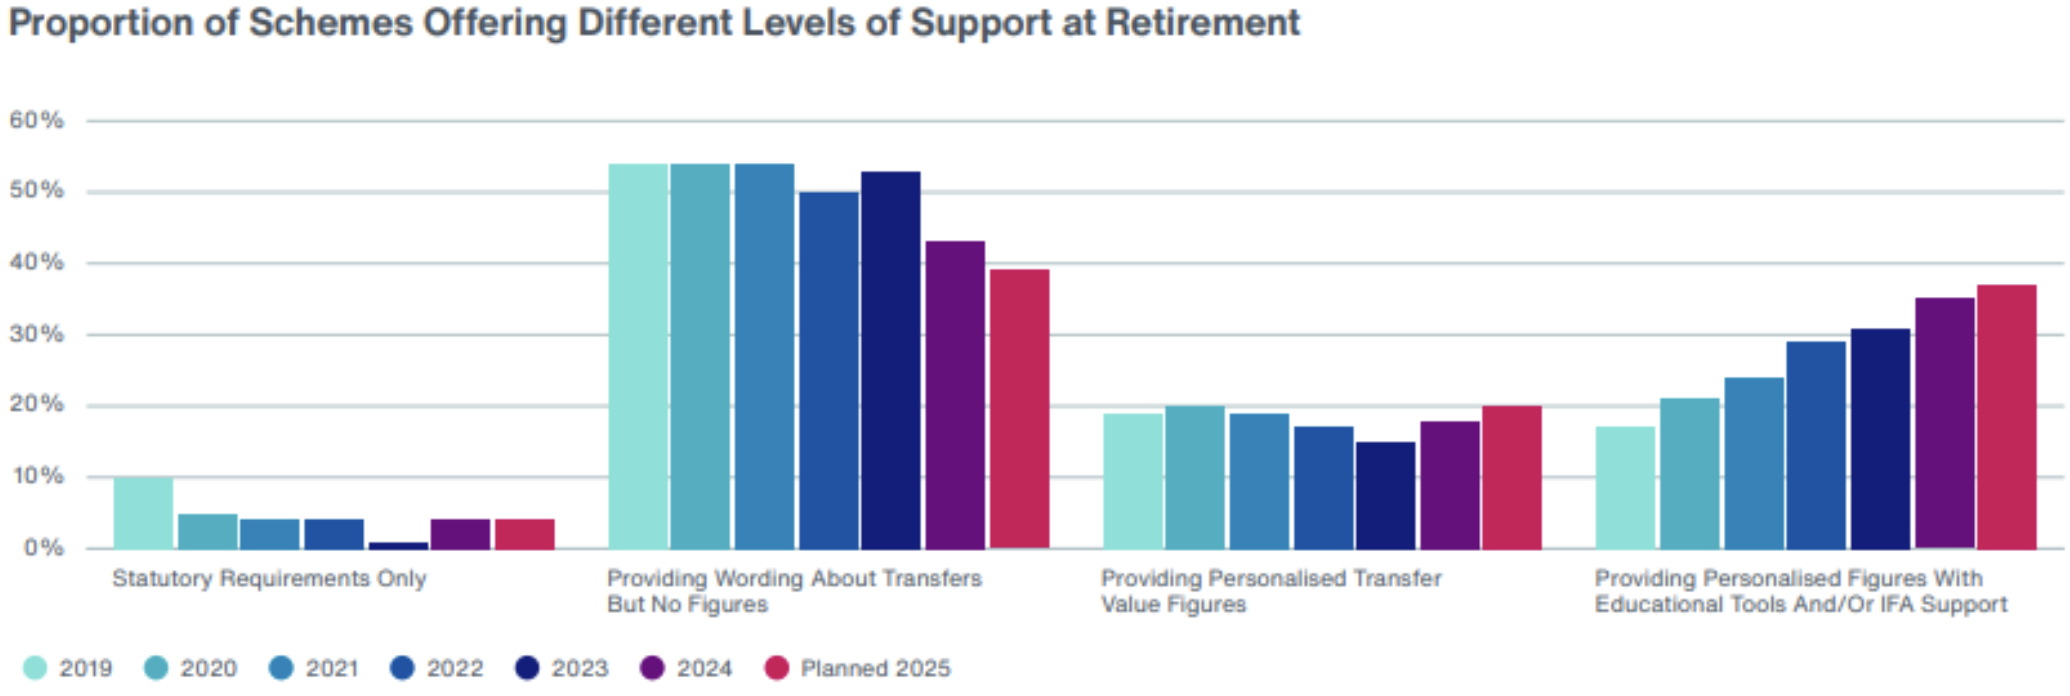 Proportion of Schemes Offering Different Levels of Support at Retirement